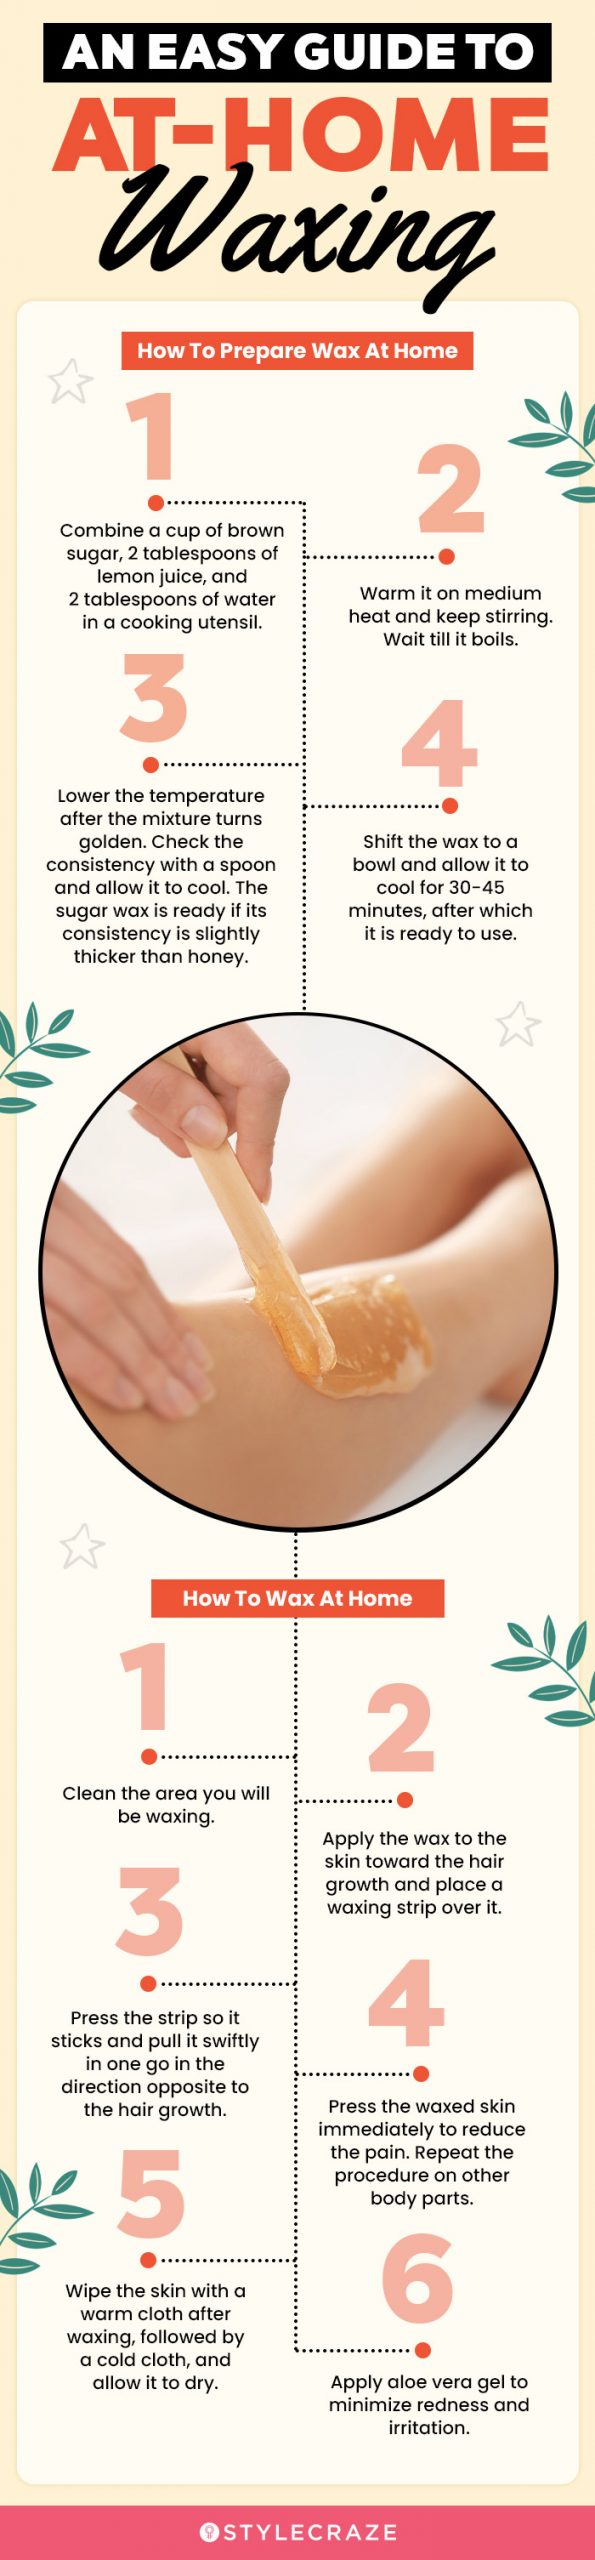 an easy guide to at home waxing (infographic)